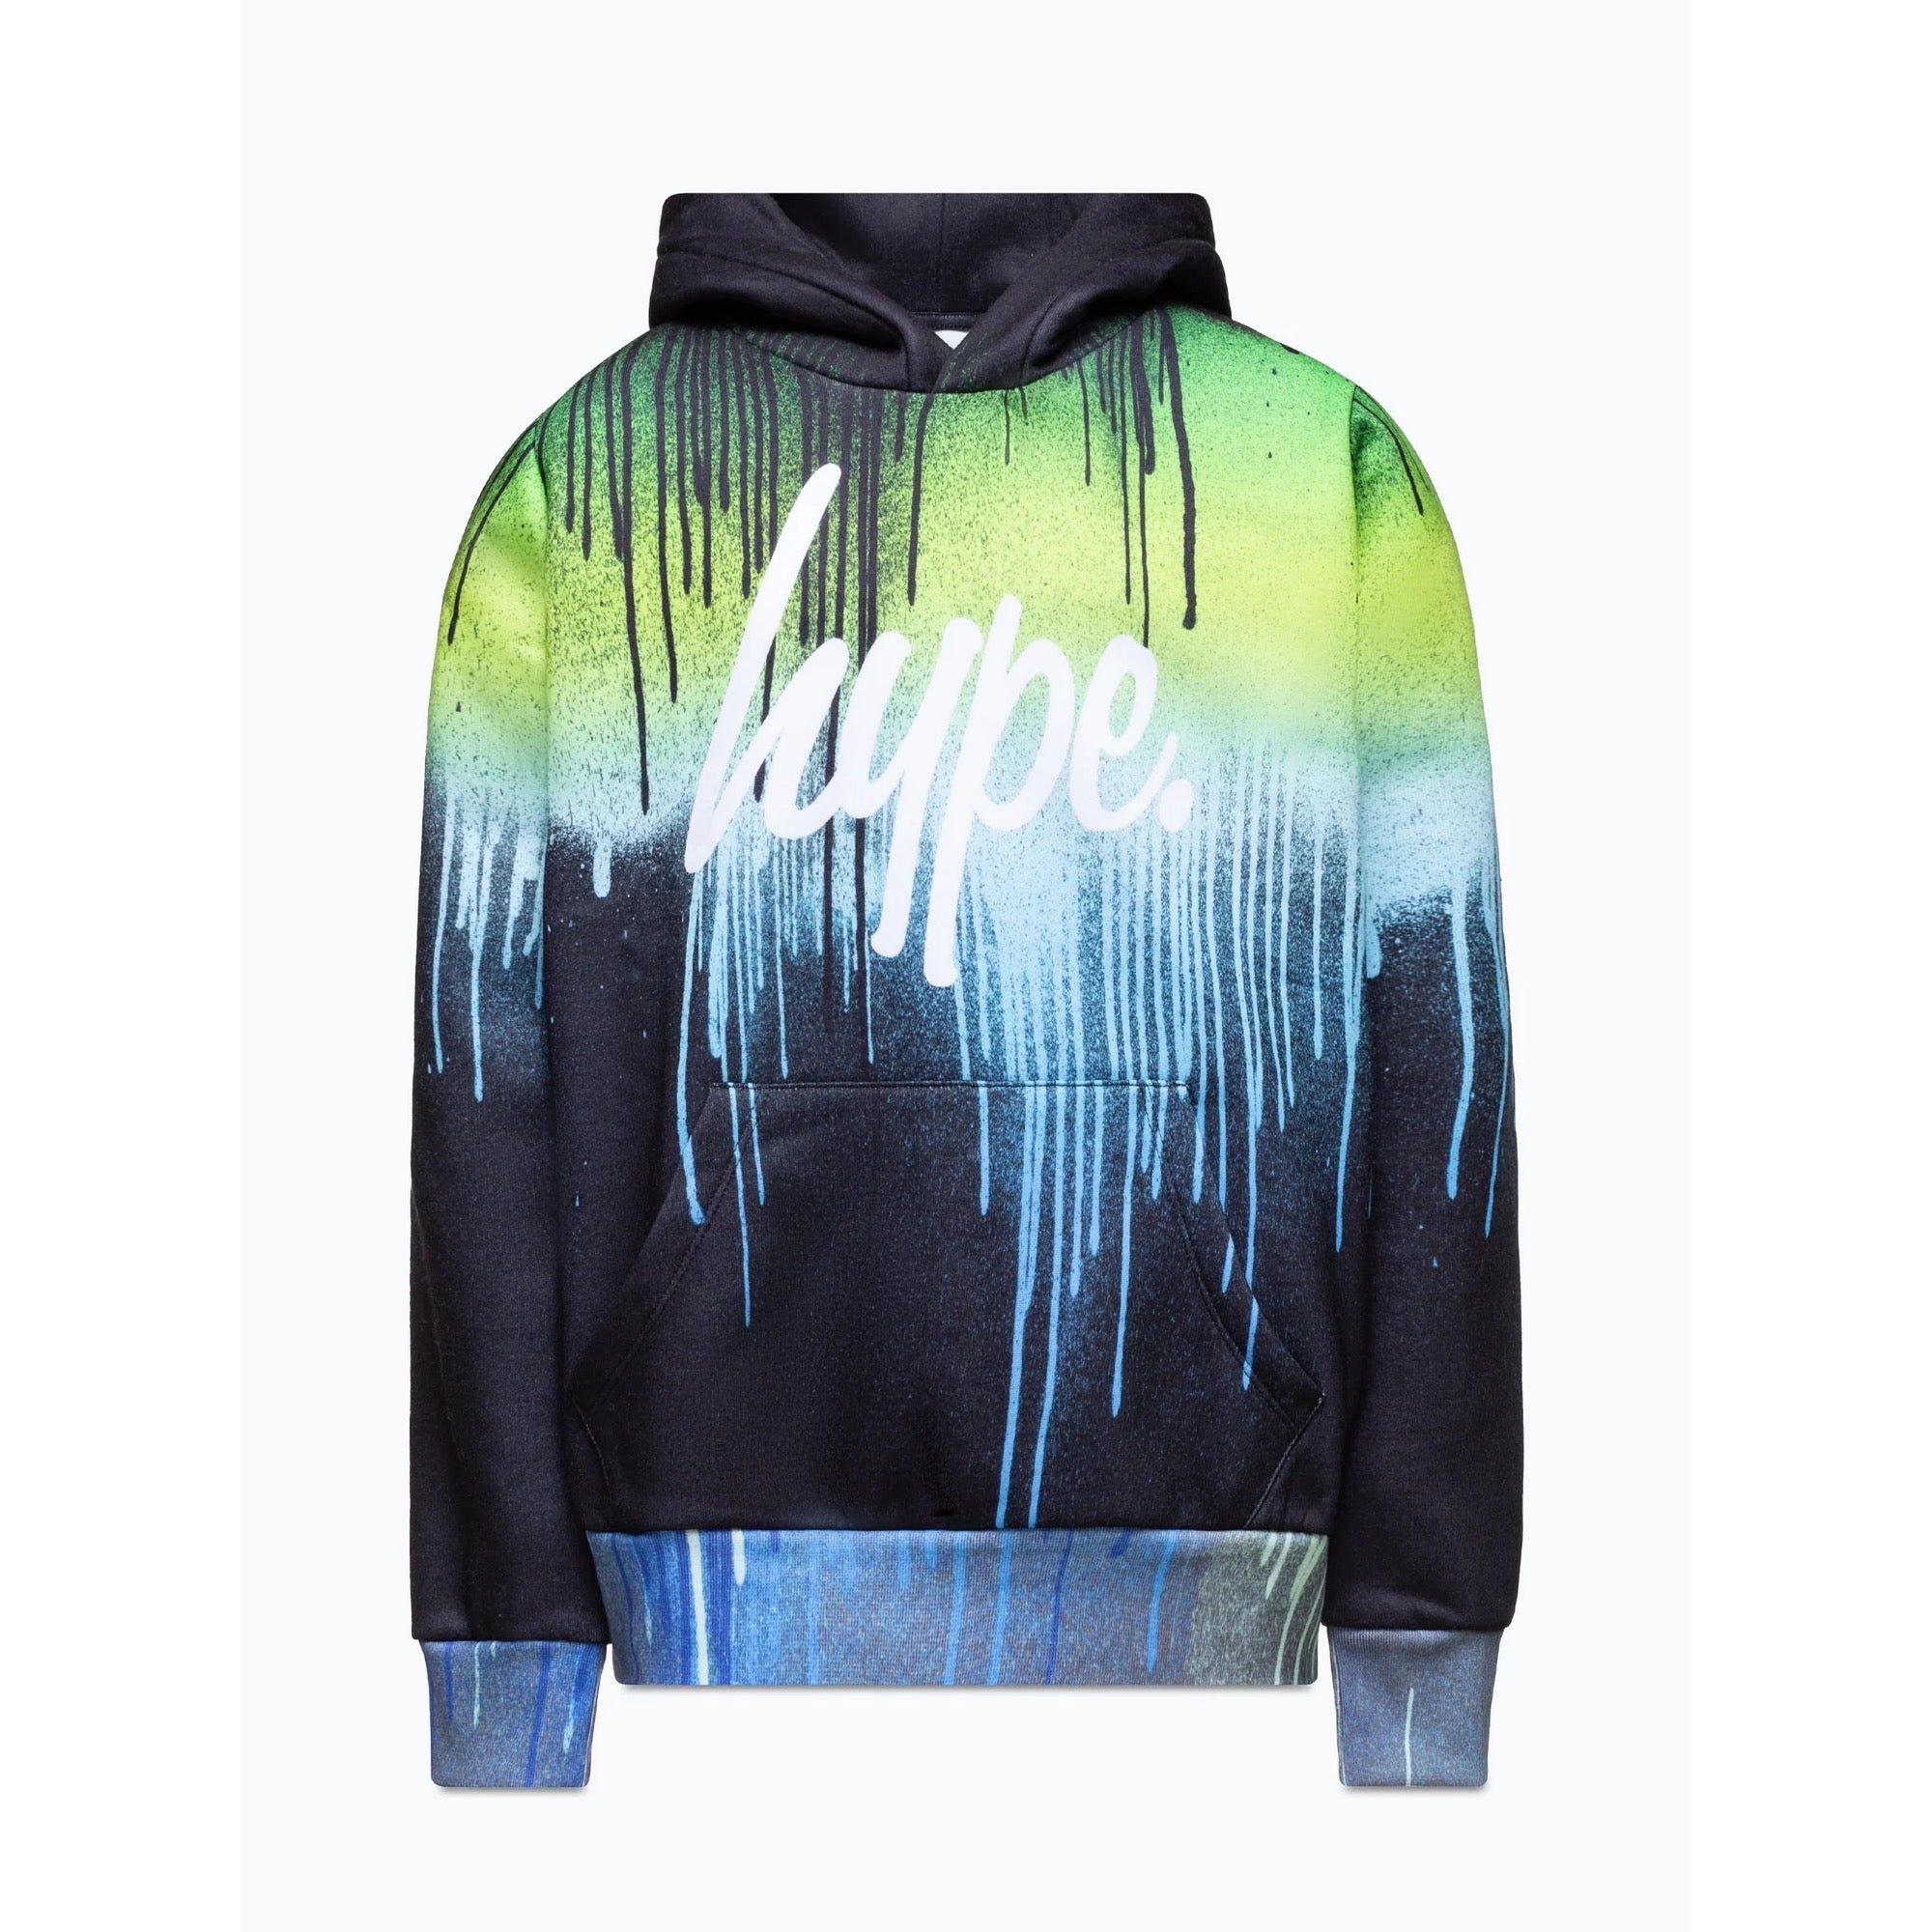 Hype Green Gradient Drips Hoodie Zuao-629 Clothing 9/10YRS / Green,11/12YRS / Green,13YRS / Green,14YRS / Green